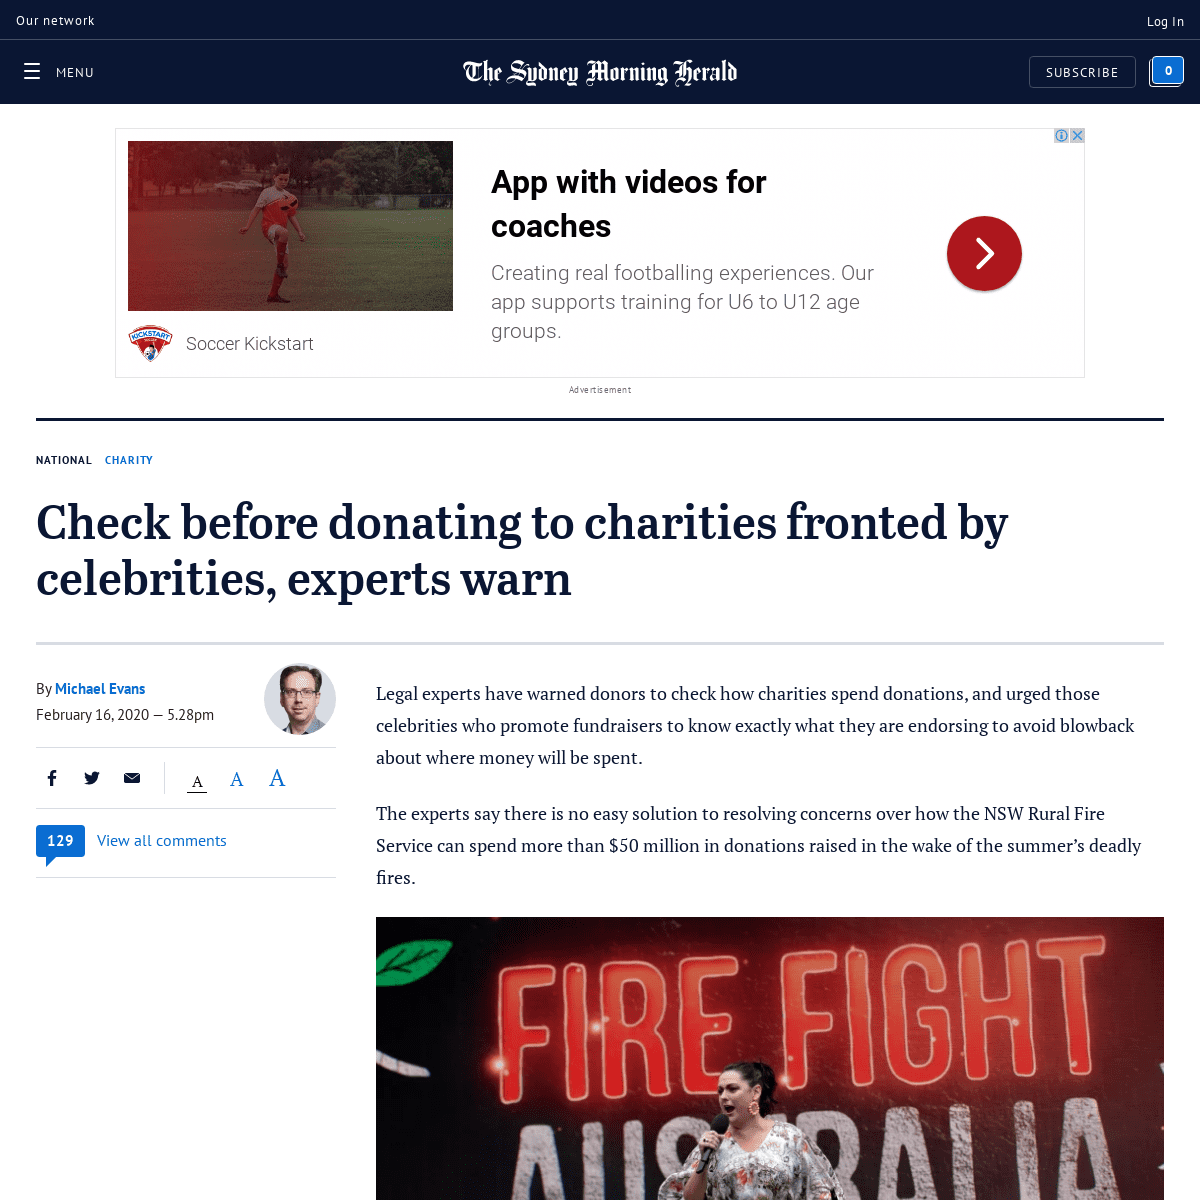 A complete backup of www.smh.com.au/national/check-before-donating-to-charities-fronted-by-celebrities-experts-warn-20200216-p54